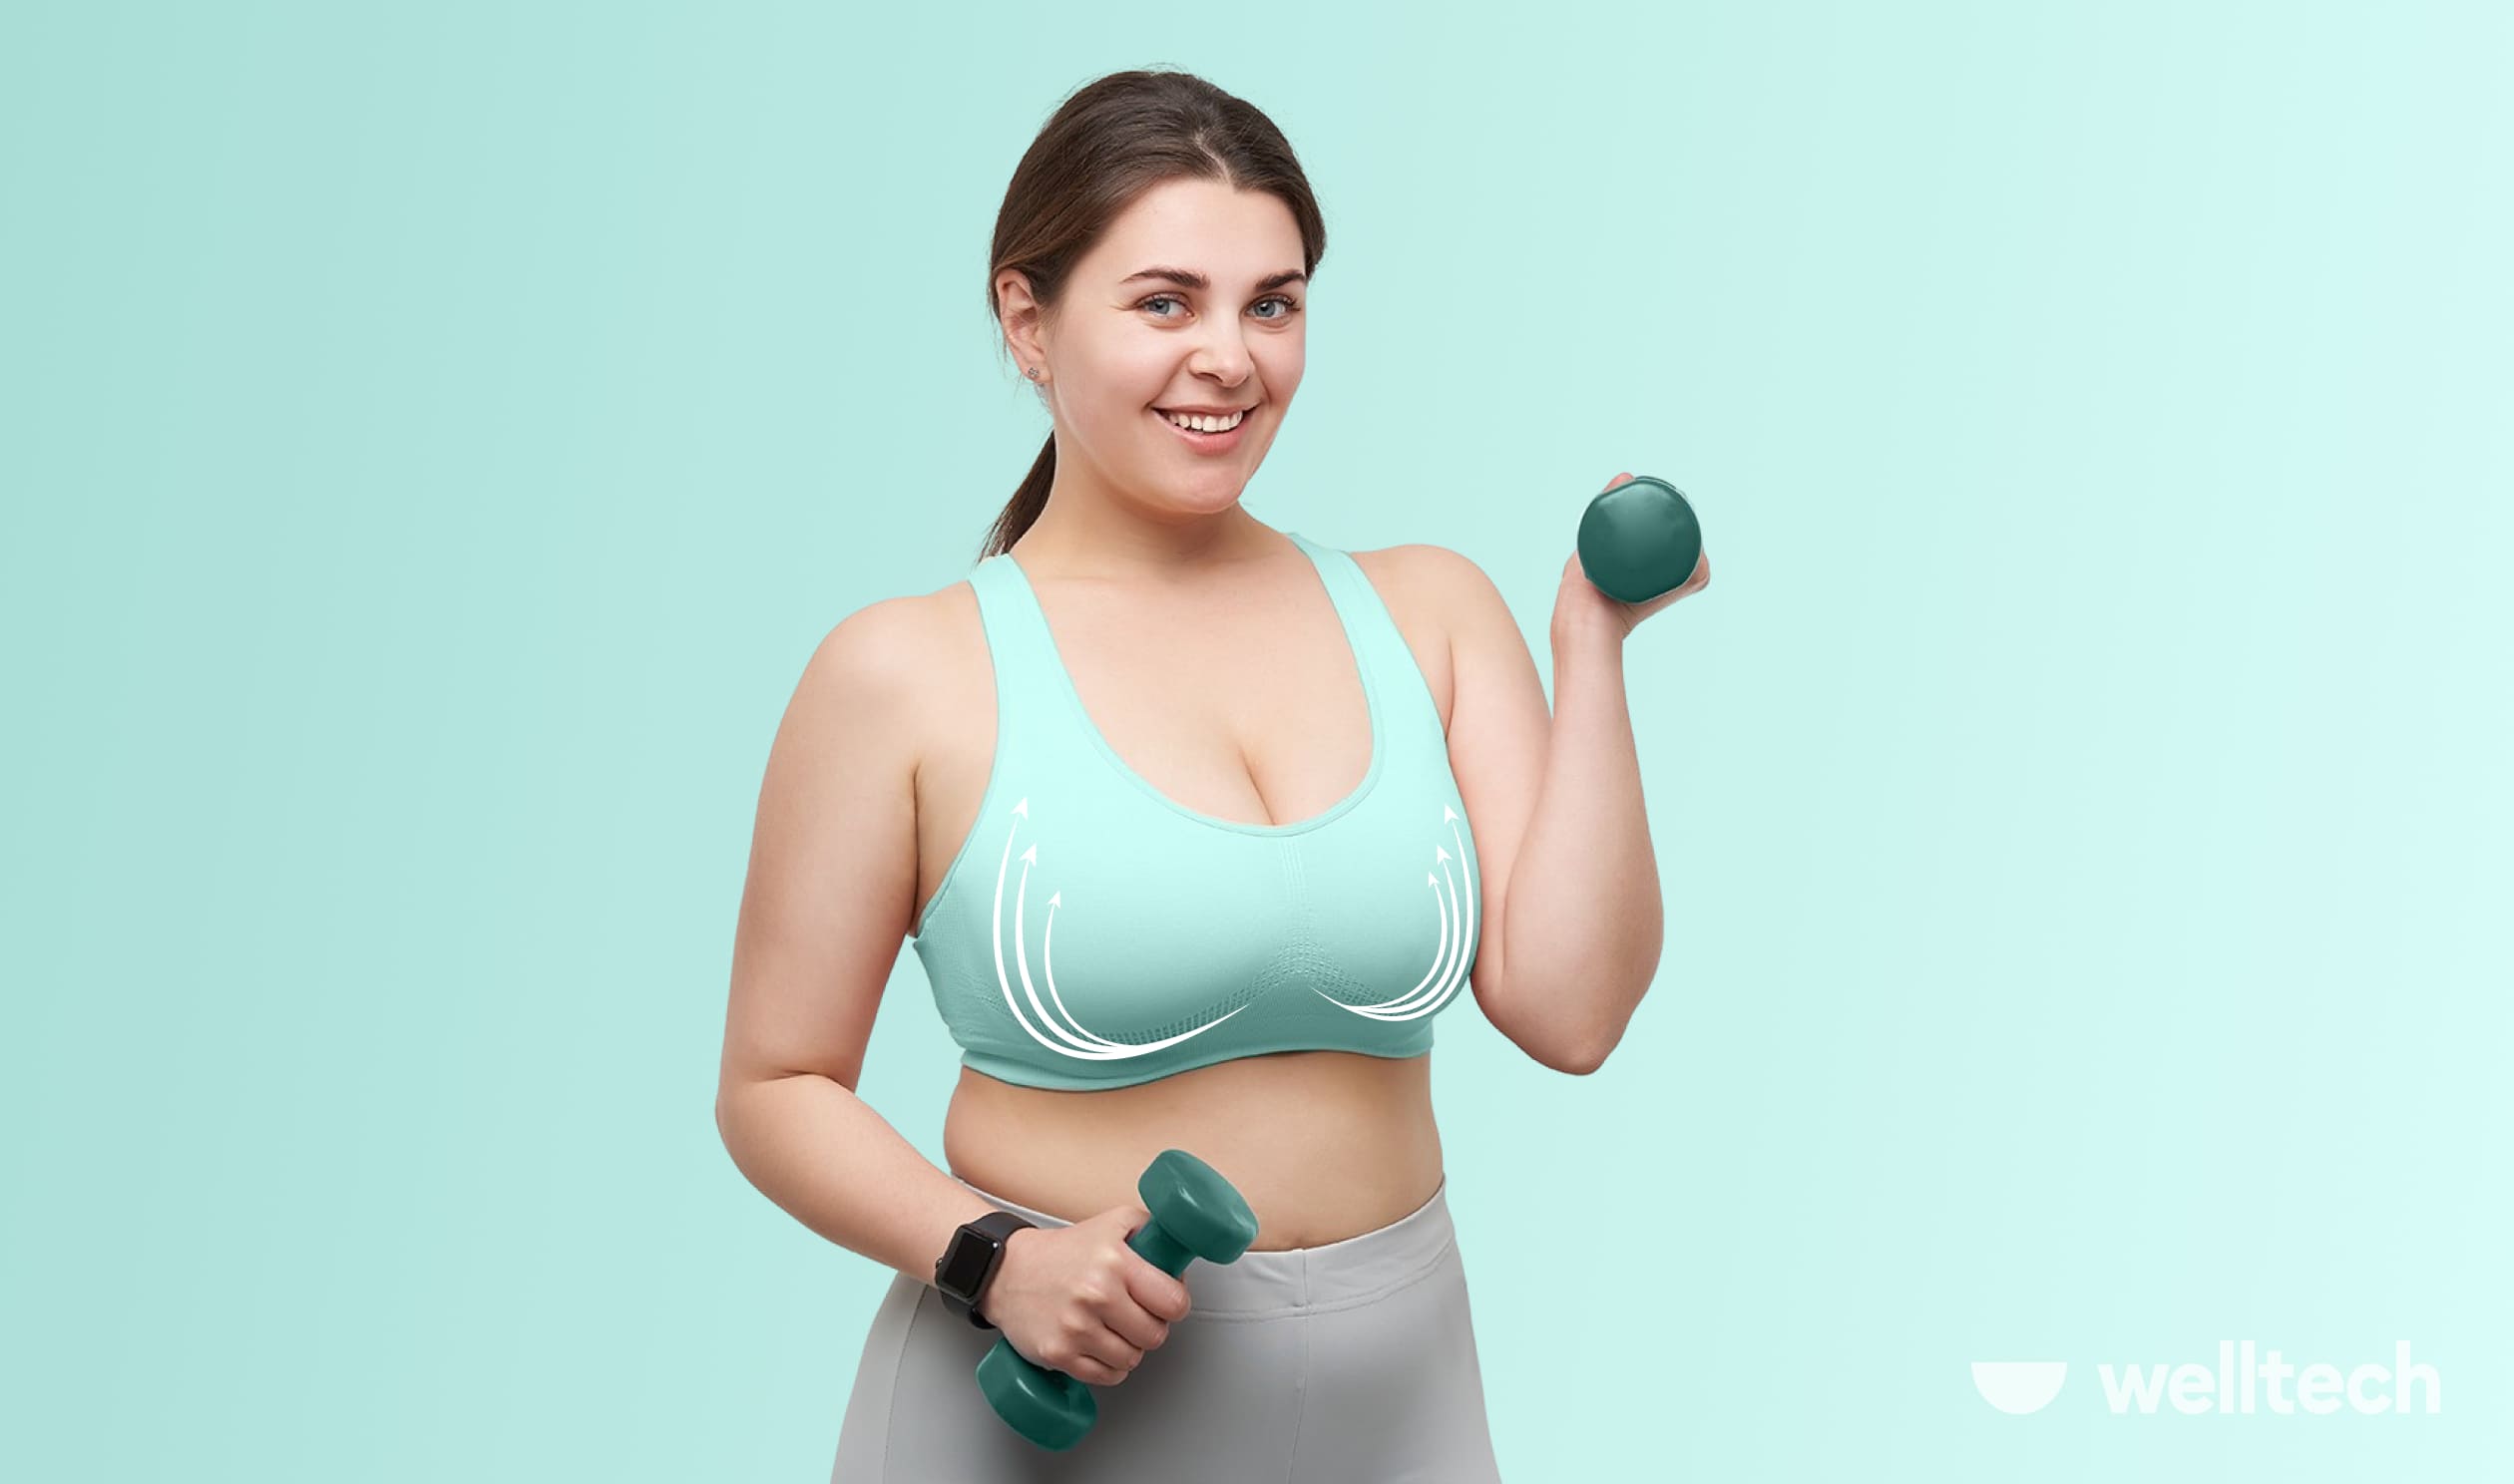 a woman with a curvy figure is working out with dumbbells, looking into the camera, smiling, breast-firming exercises